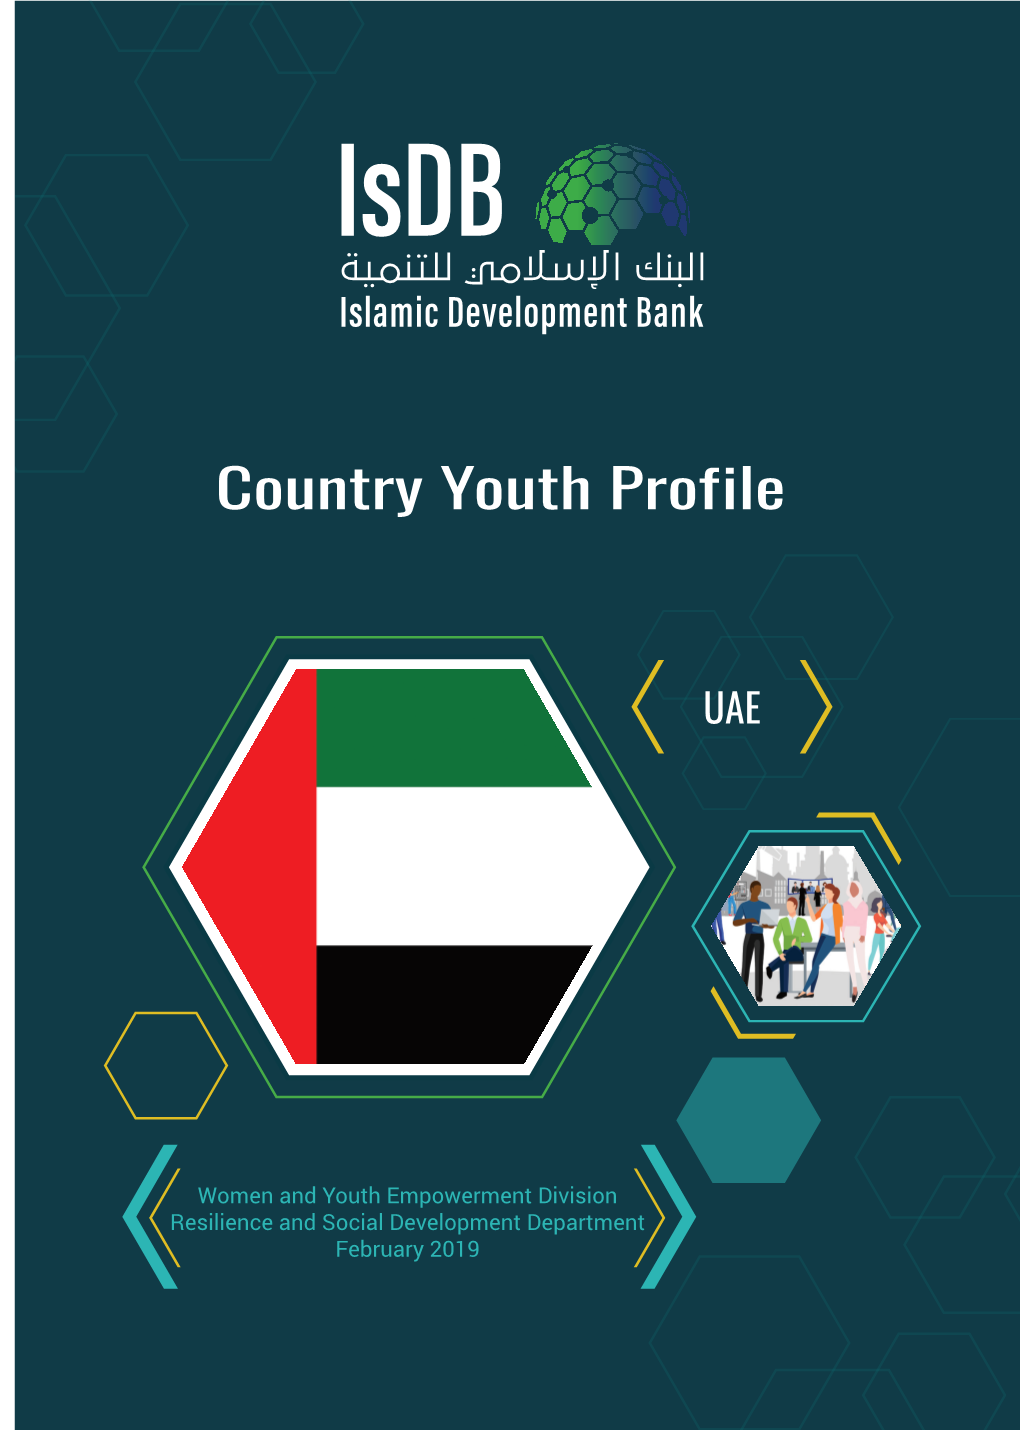 Country Youth Profile -UAE